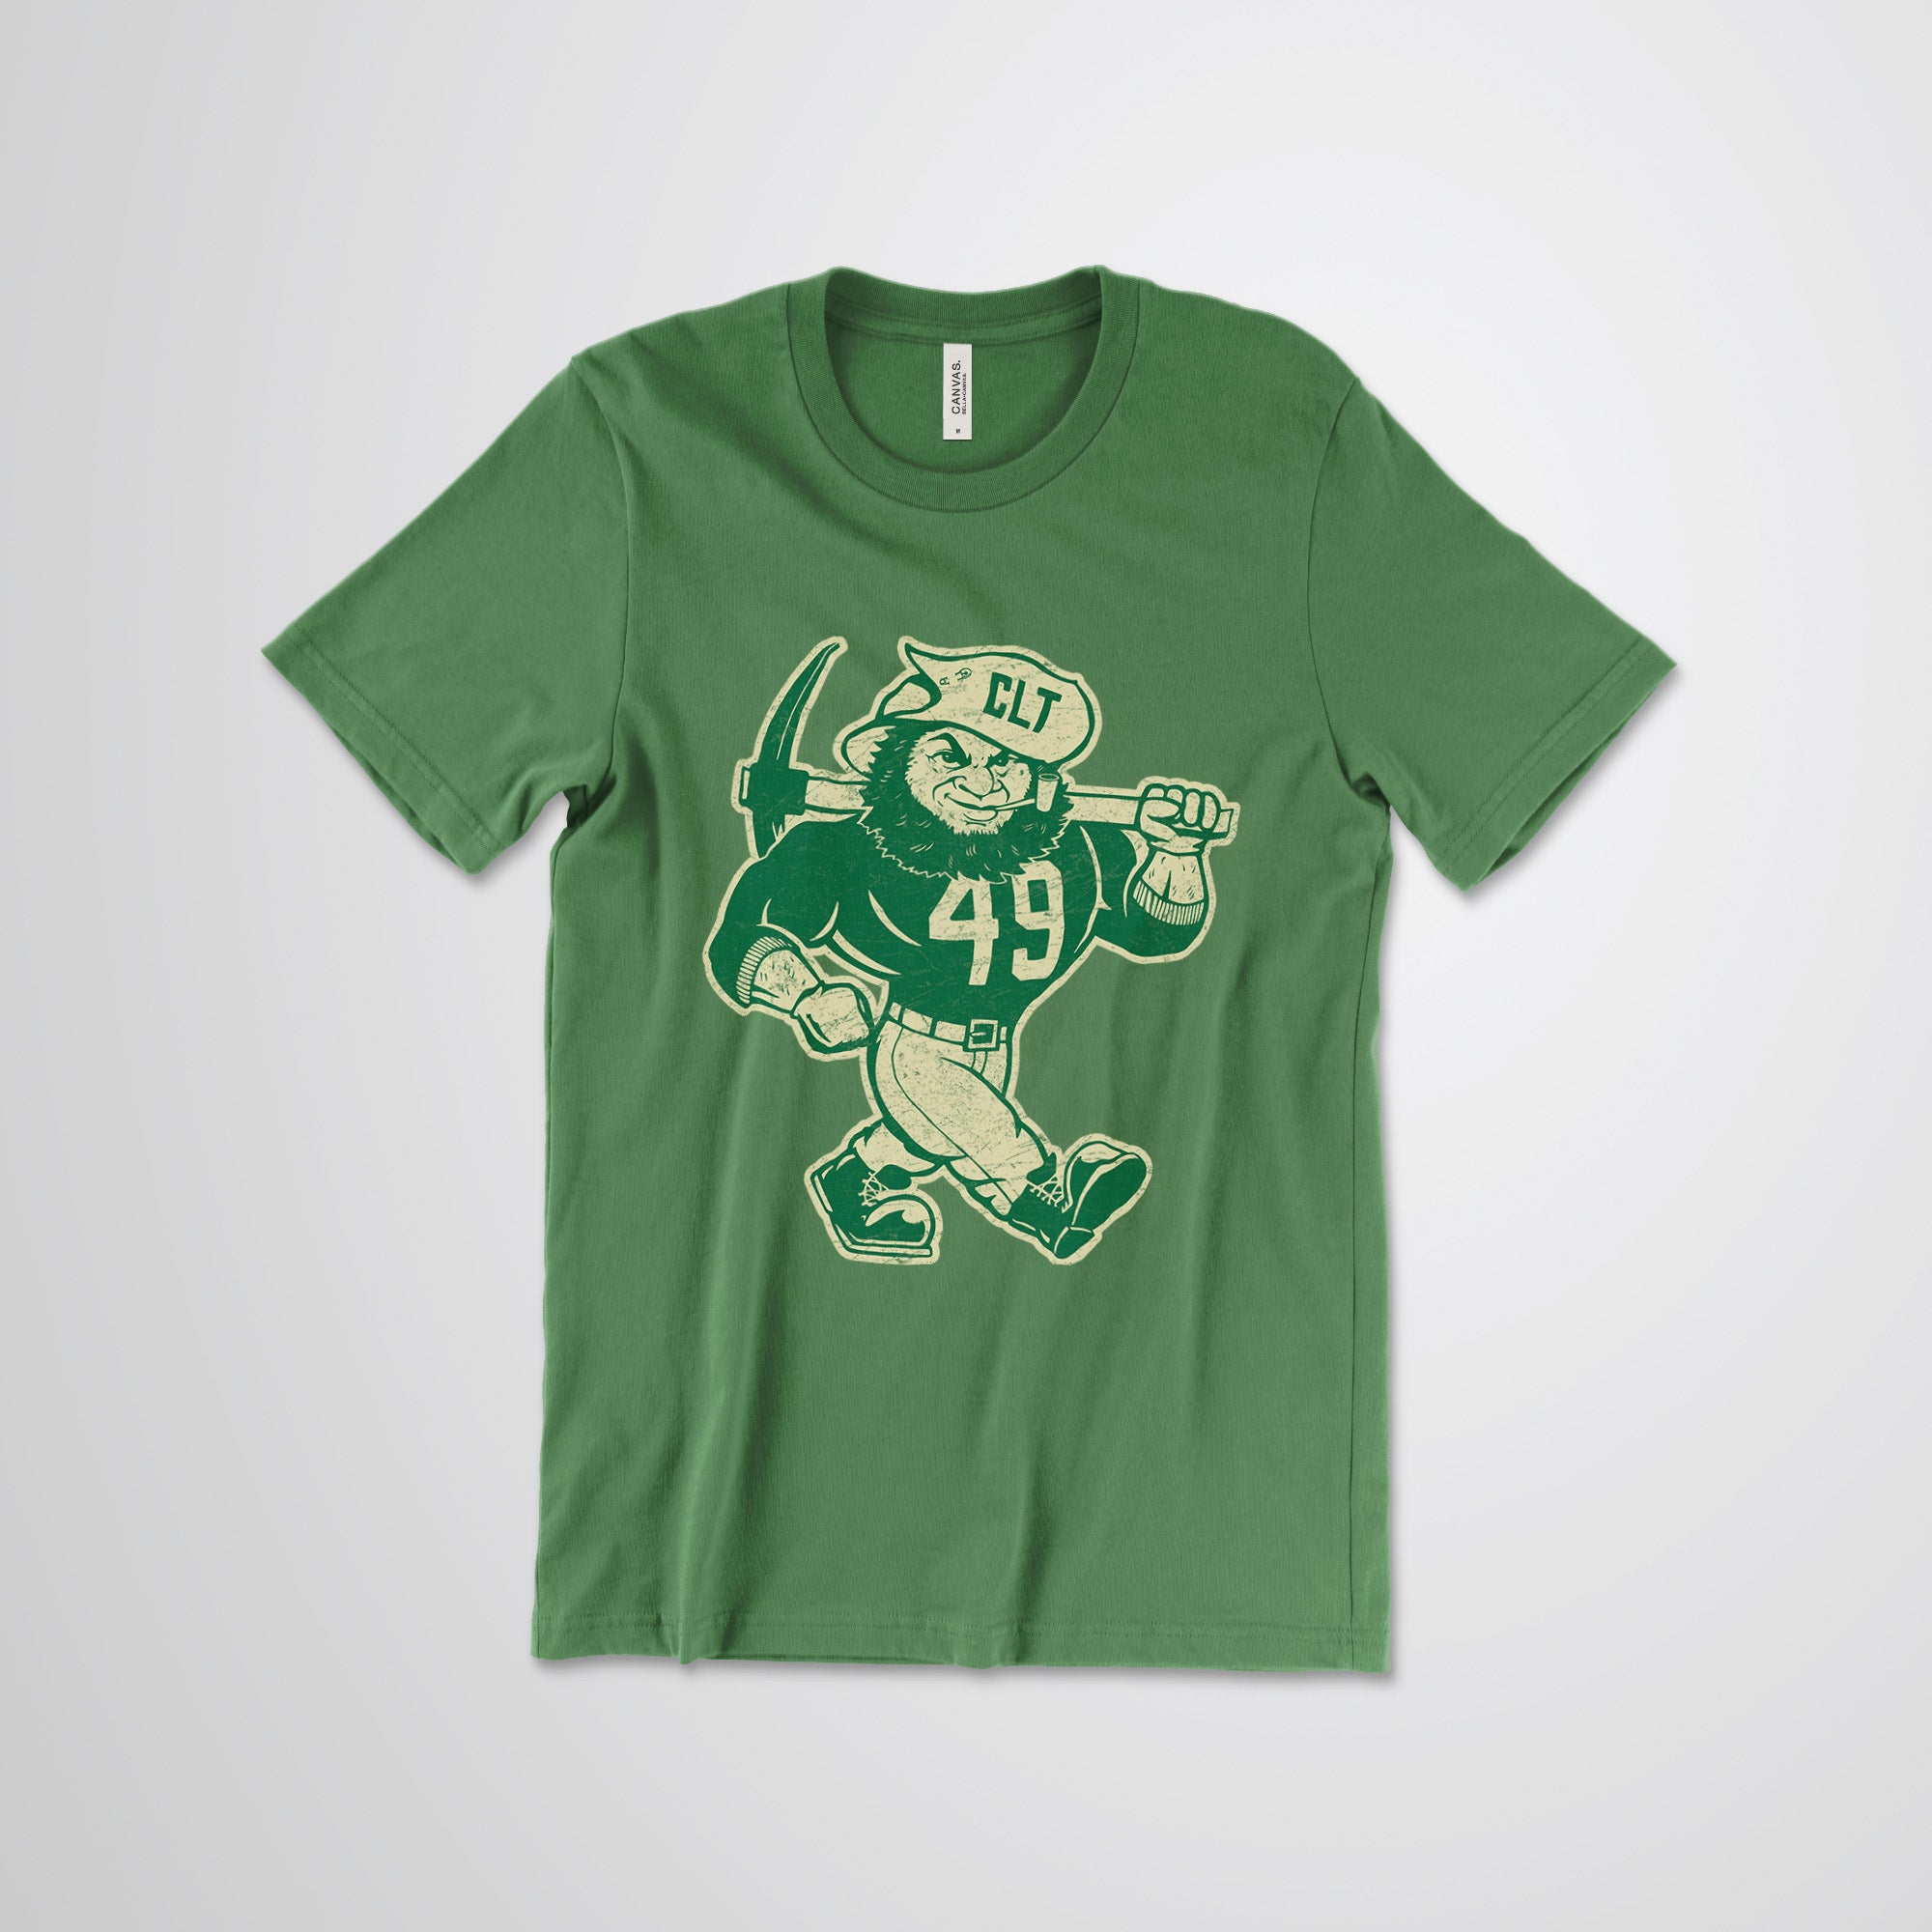 Big Norm Cream of the Crop Charlotte 49ers Tee